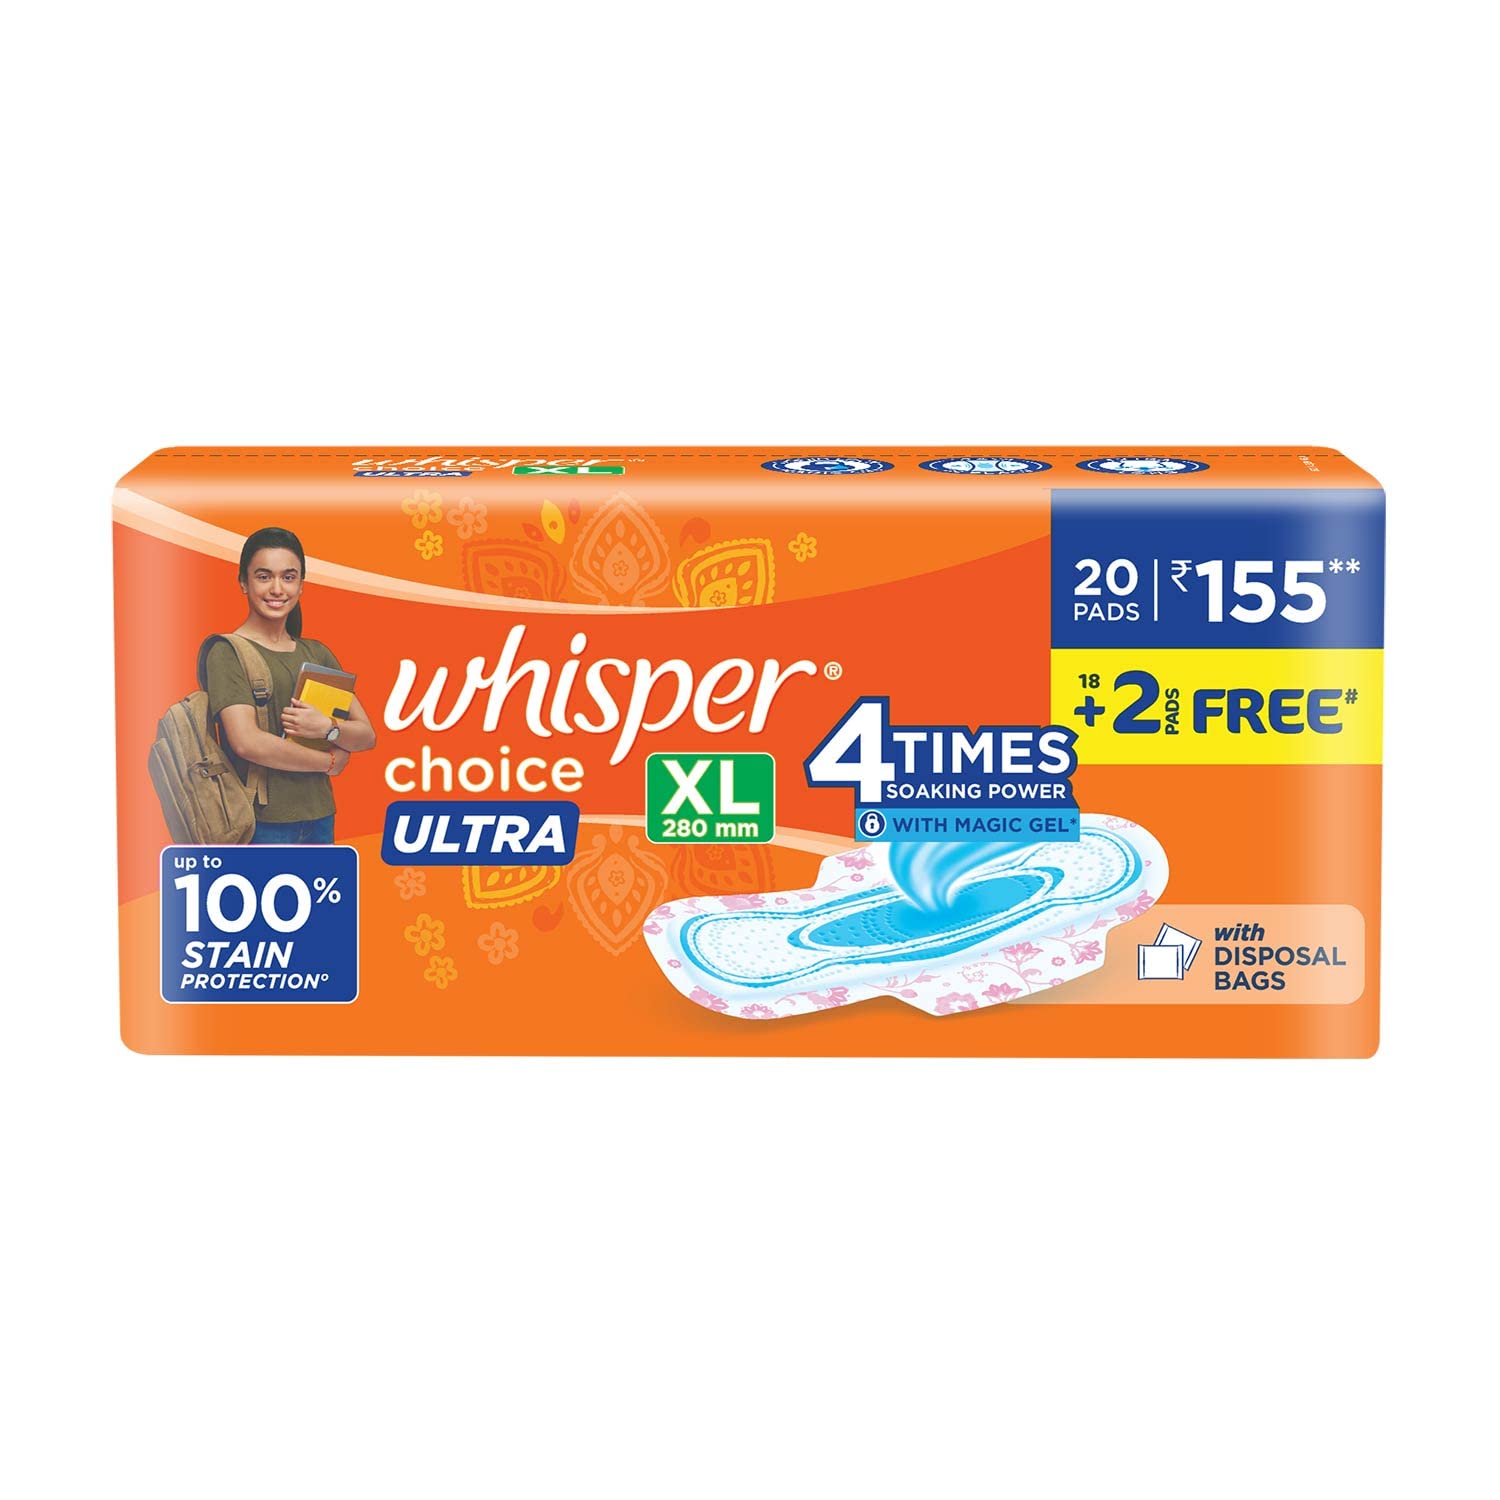 Whisper Choice Ultra XL Sanitary Pads|20 thin Pads|XL|upto 100% Stain protection|side safe Wings|With Liquid lock magic gel|5 cm longer & 20% wider|DRI-weave topsheet|28.4 cm Long|With disposable wrap| 2 Pads Free